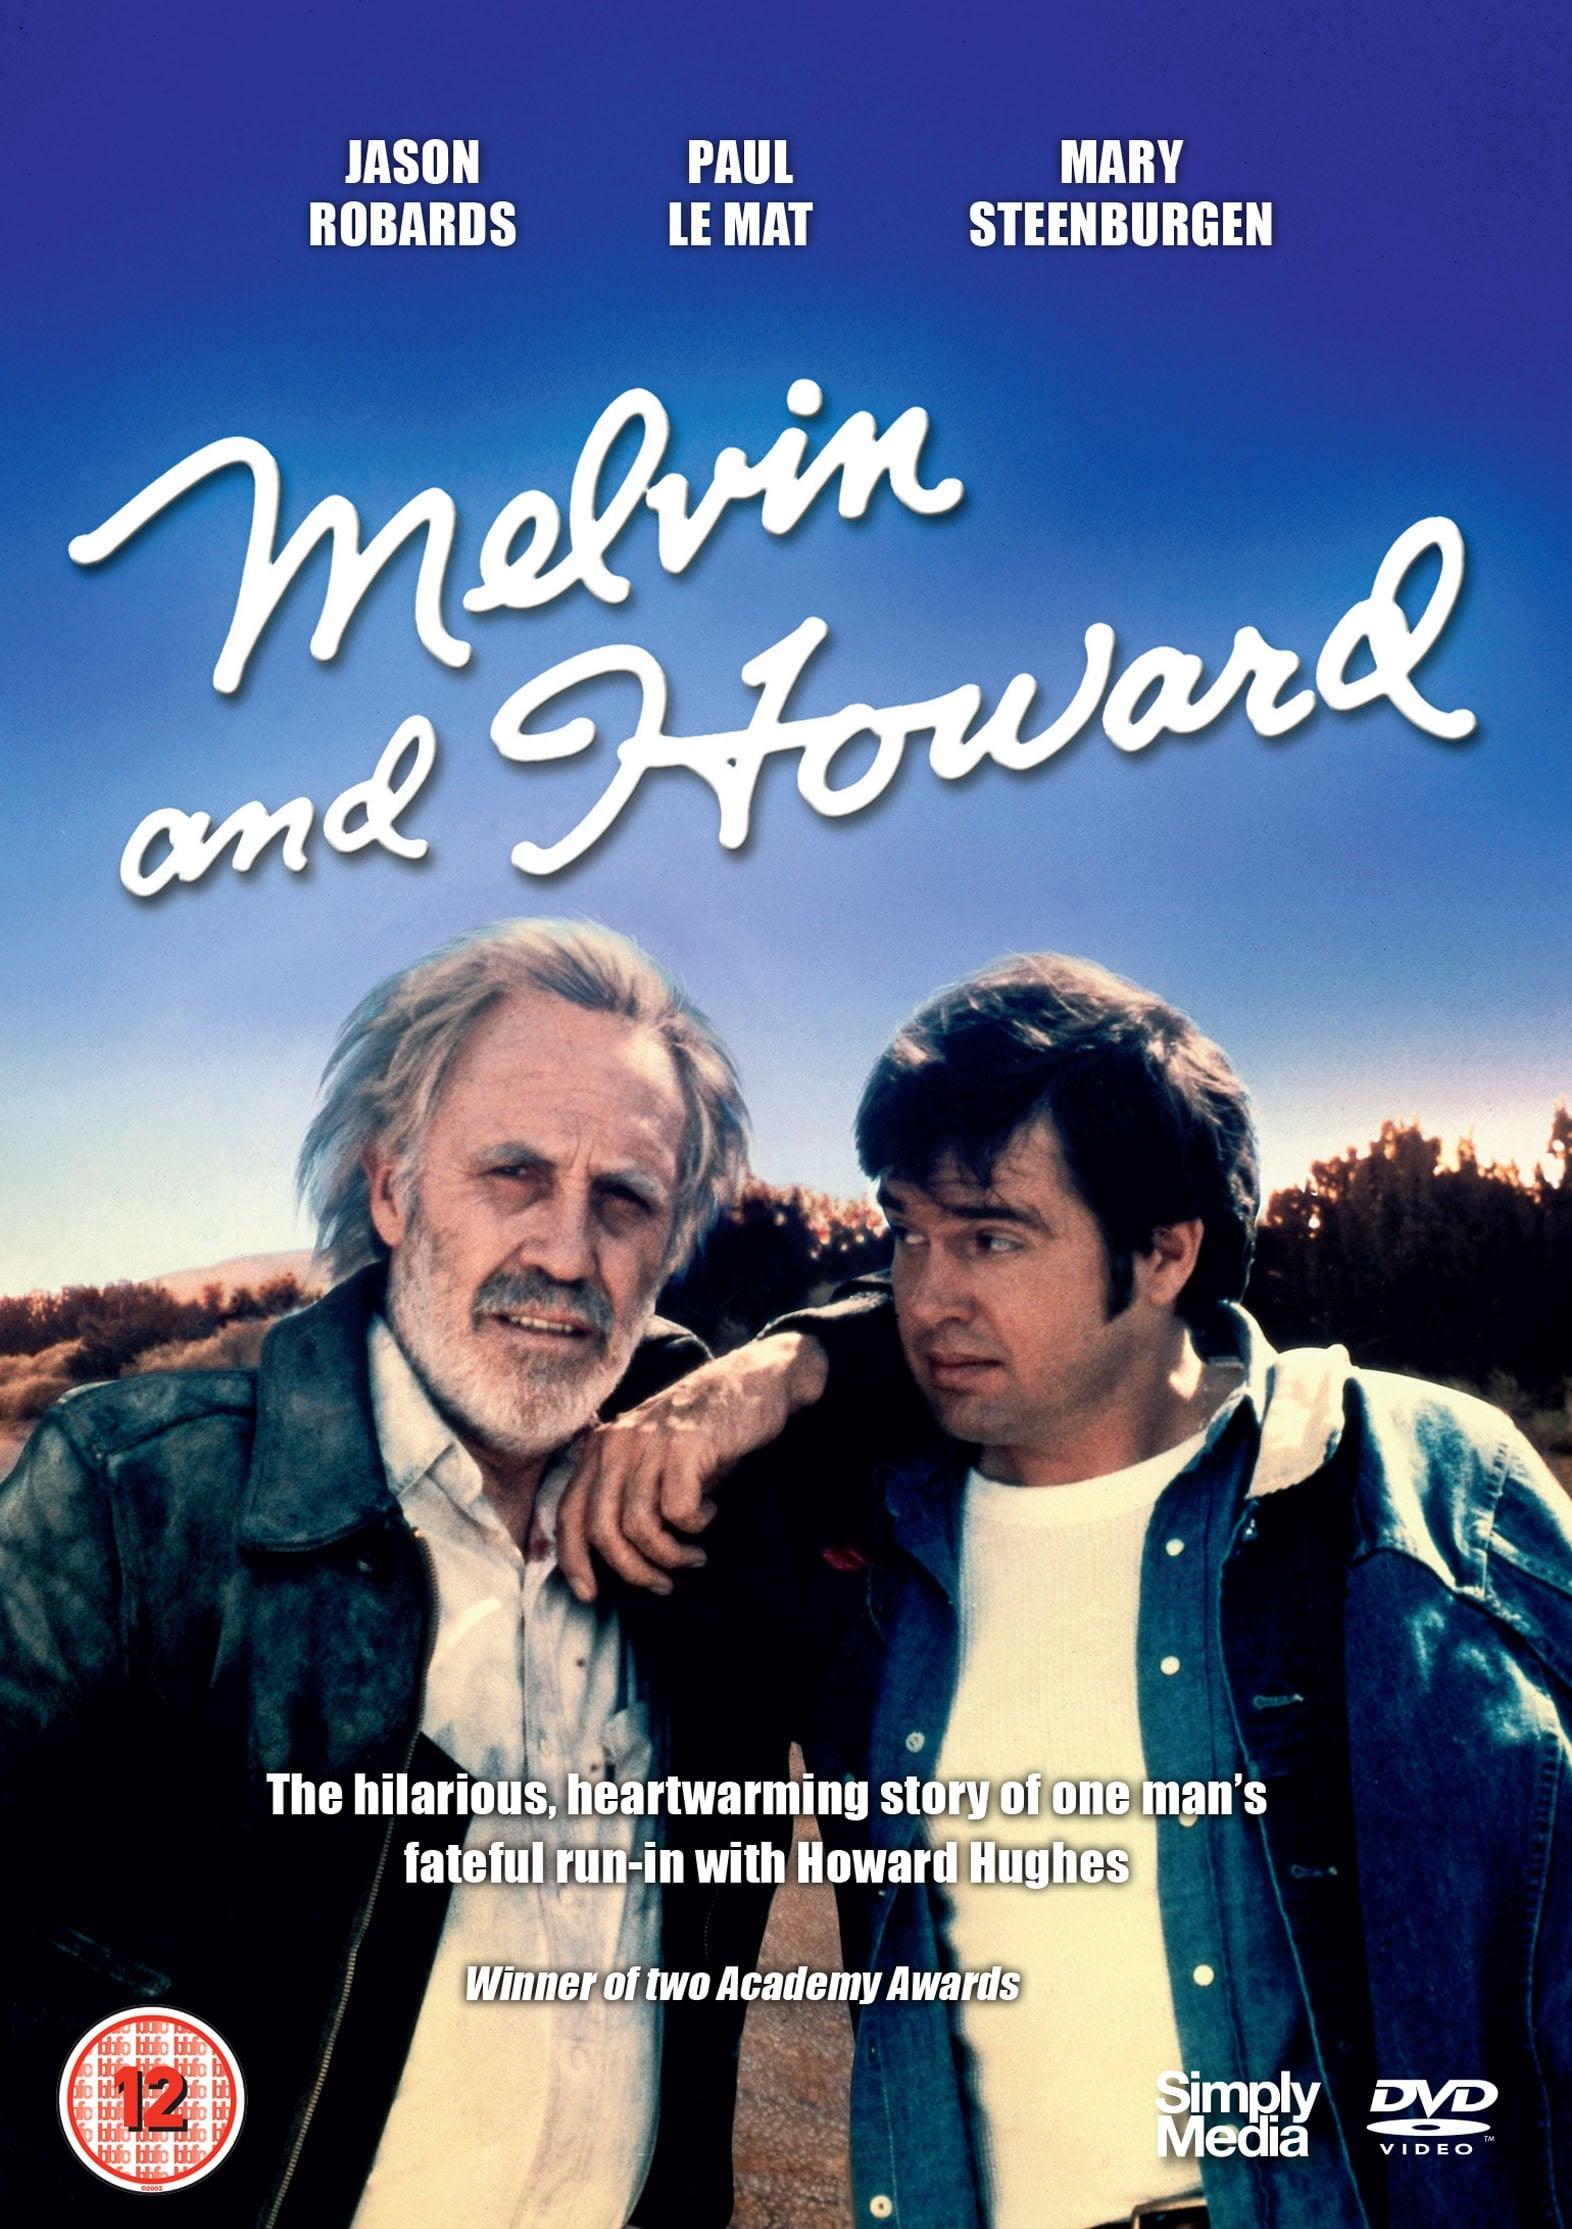 Melvin and Howard poster